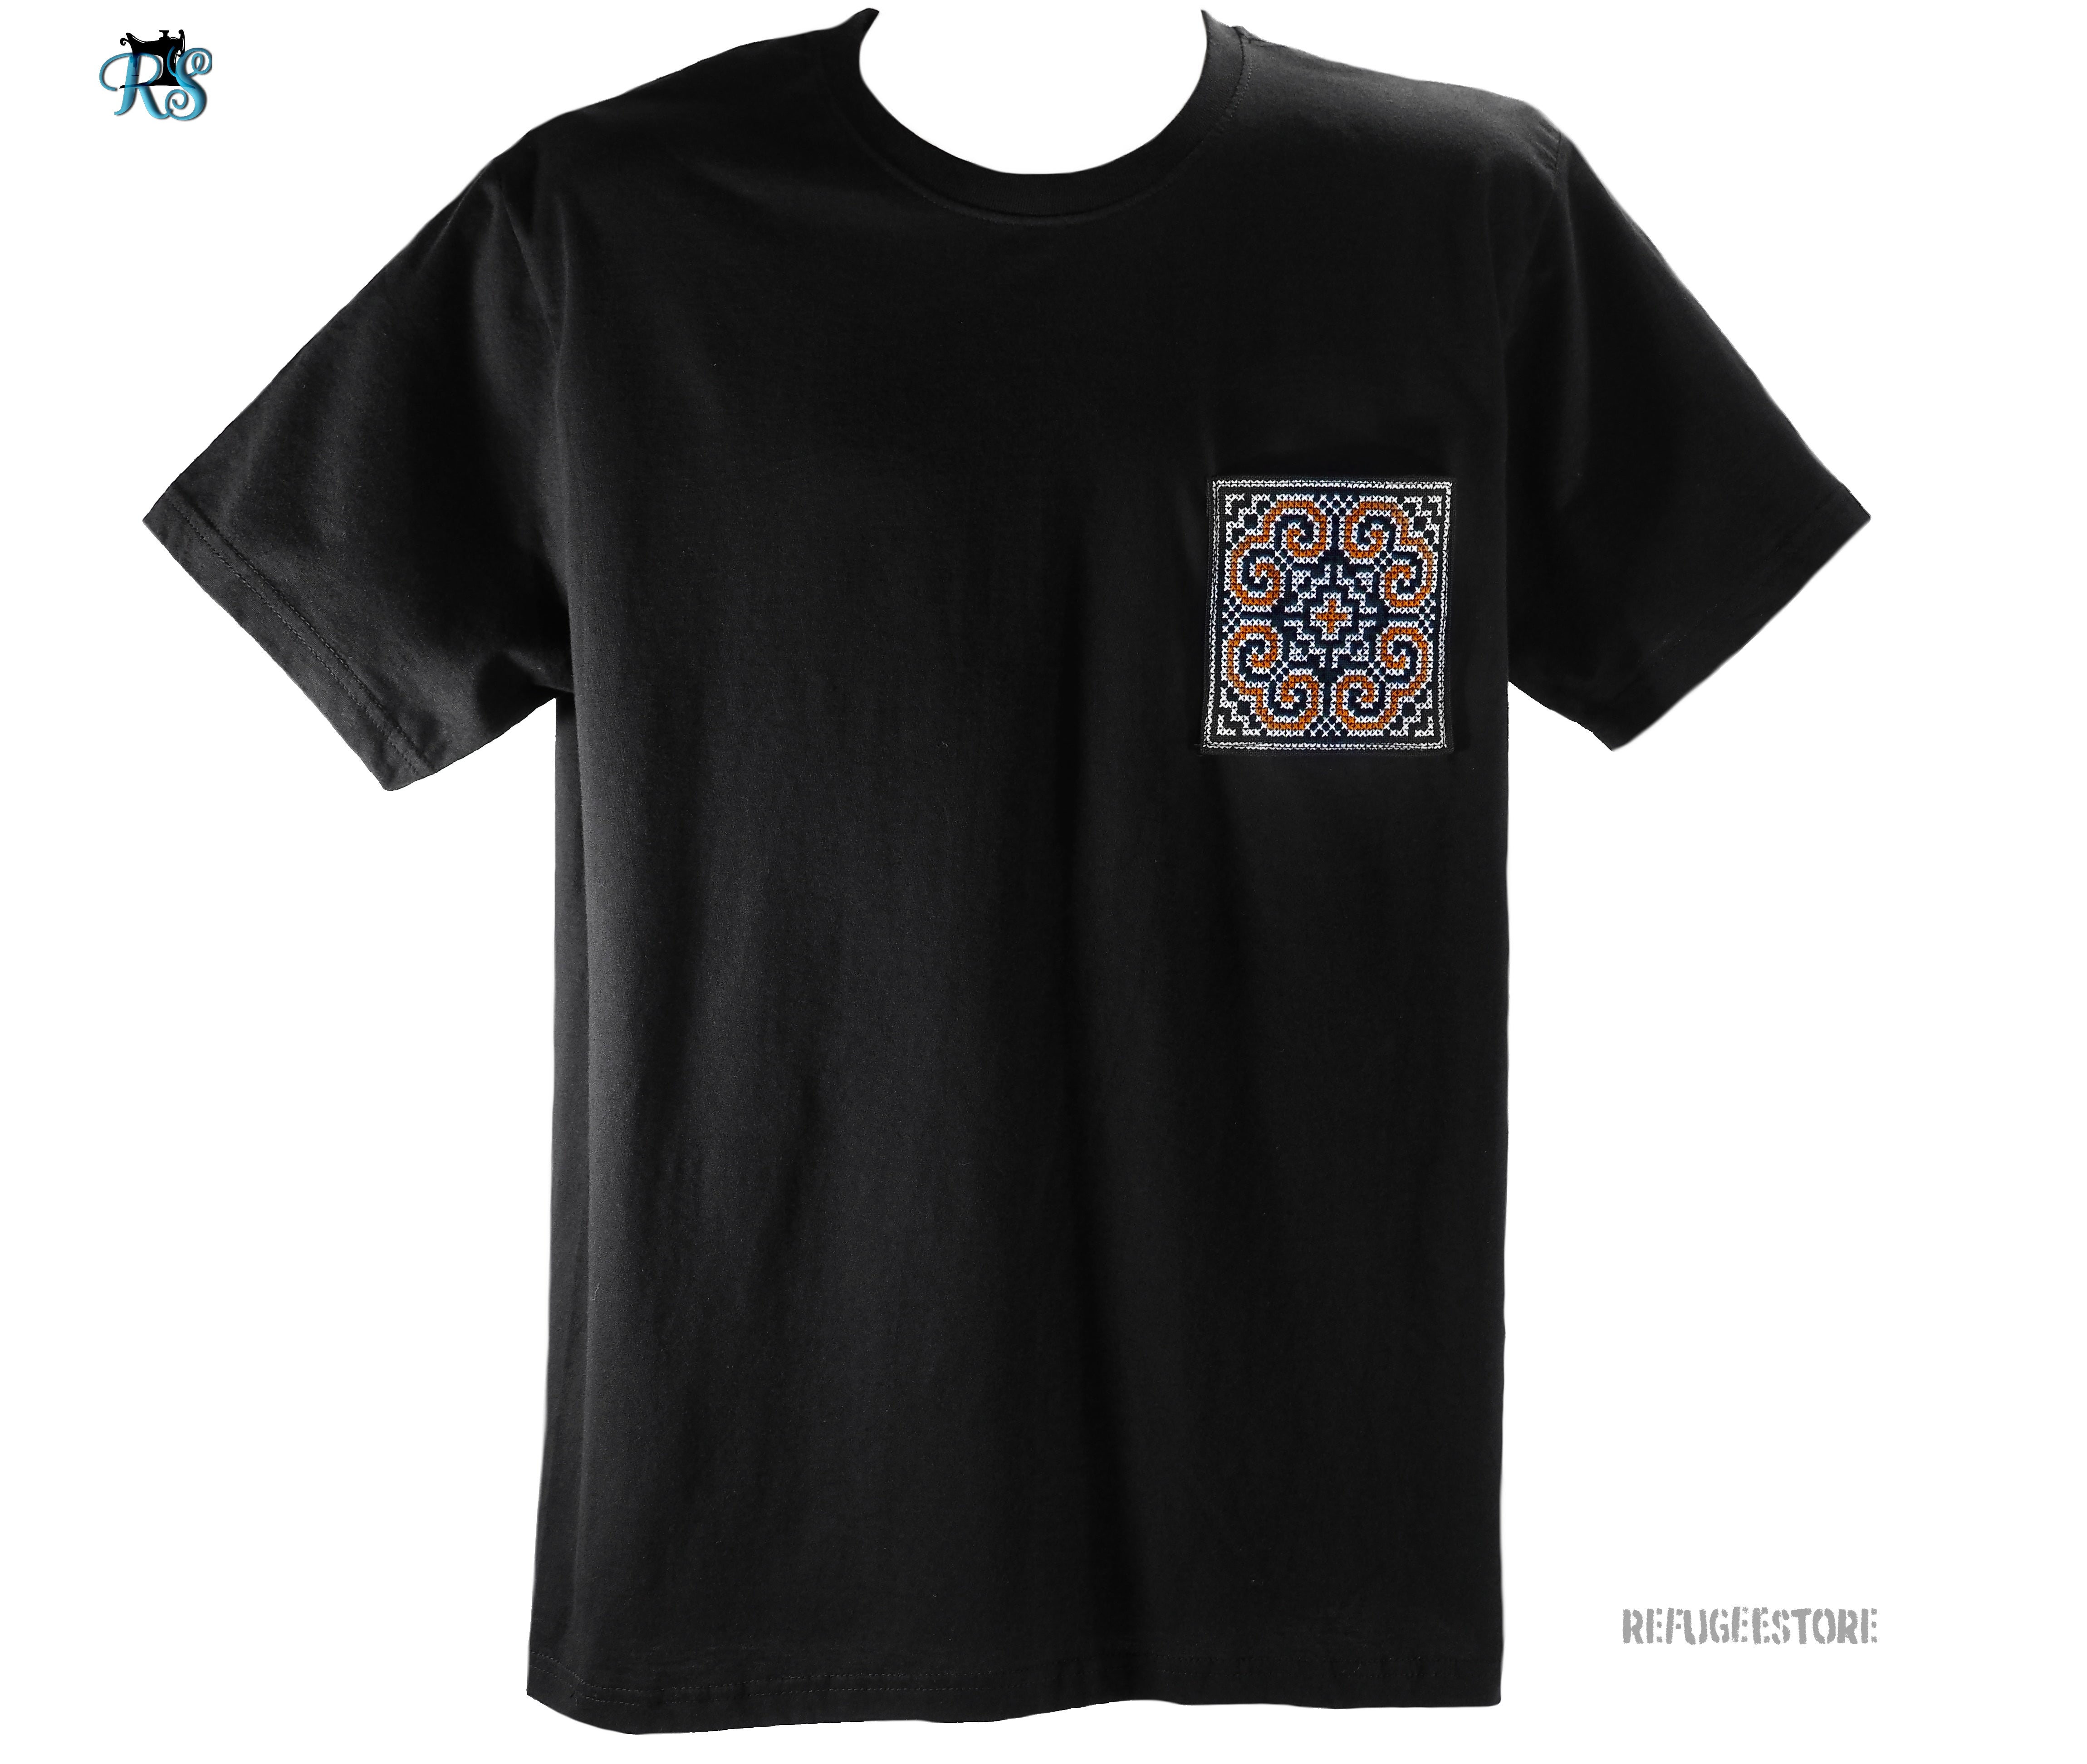 Handmade Hmong Embroidery T-Shirt made with 100% combed cotton (category-32), producing a smooth feel to the fabric, and durability for care. The front pocket is hand-embroidered with Hmong Tribal designed pattern. Size 2XL (Chest 57 cm across. Body-length 74 cm.), American-Size Equivalence 45" (Extra Large). True Black Body. Burgundy Elephant Footprint Embroidery Pattern on Black Canvas, Silver Border. 100% Fully-Combed Cotton